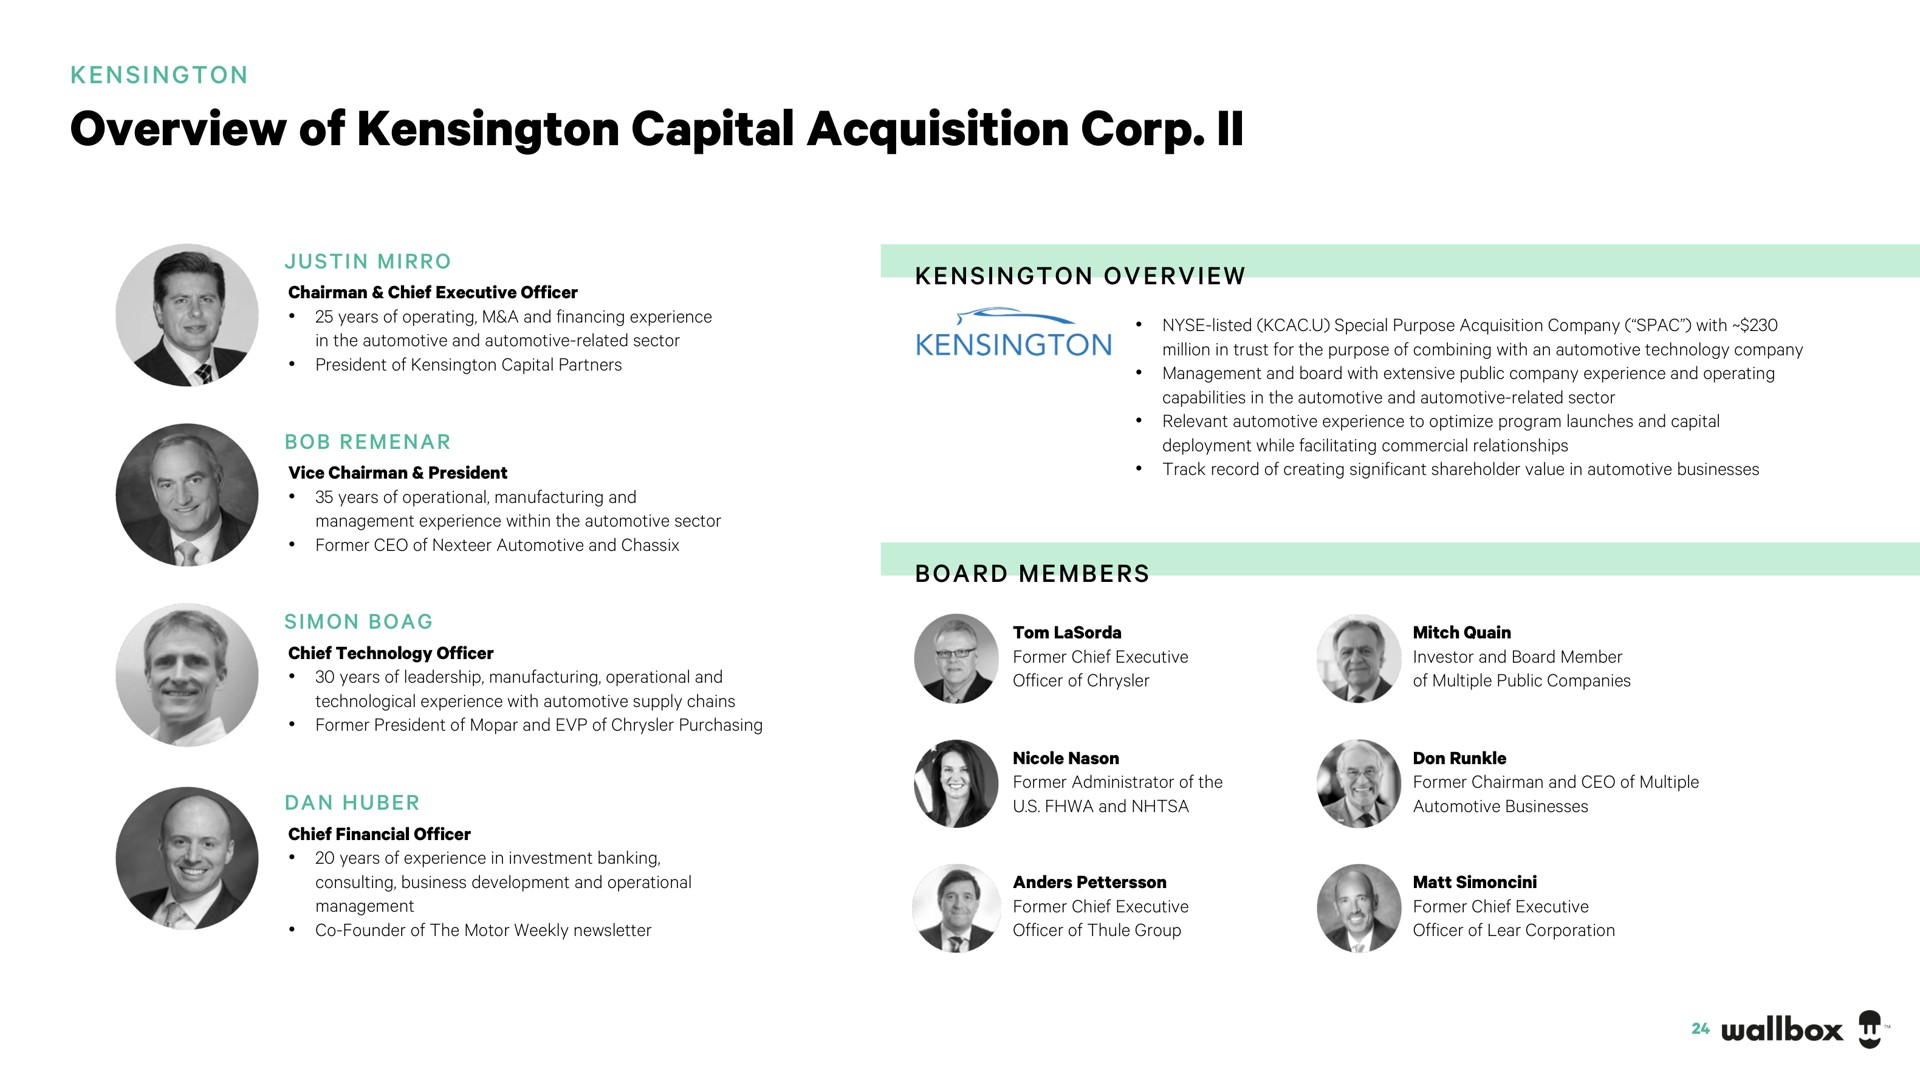 overview of kensington capital acquisition corp | Wallbox